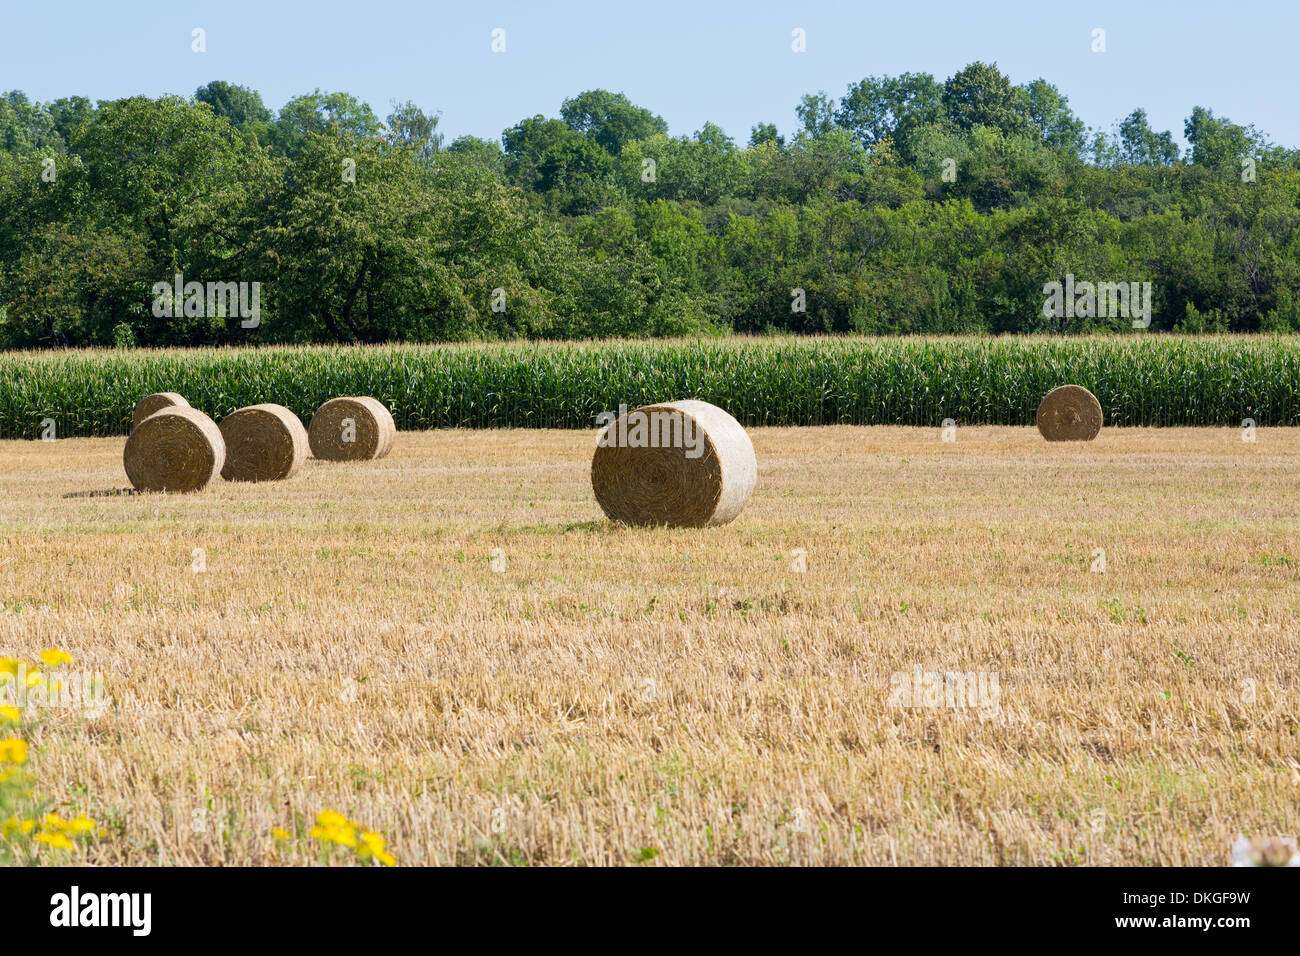 Bales of straw on a field, Bas-Rhin, Alsace, France, Europe Stock Photo